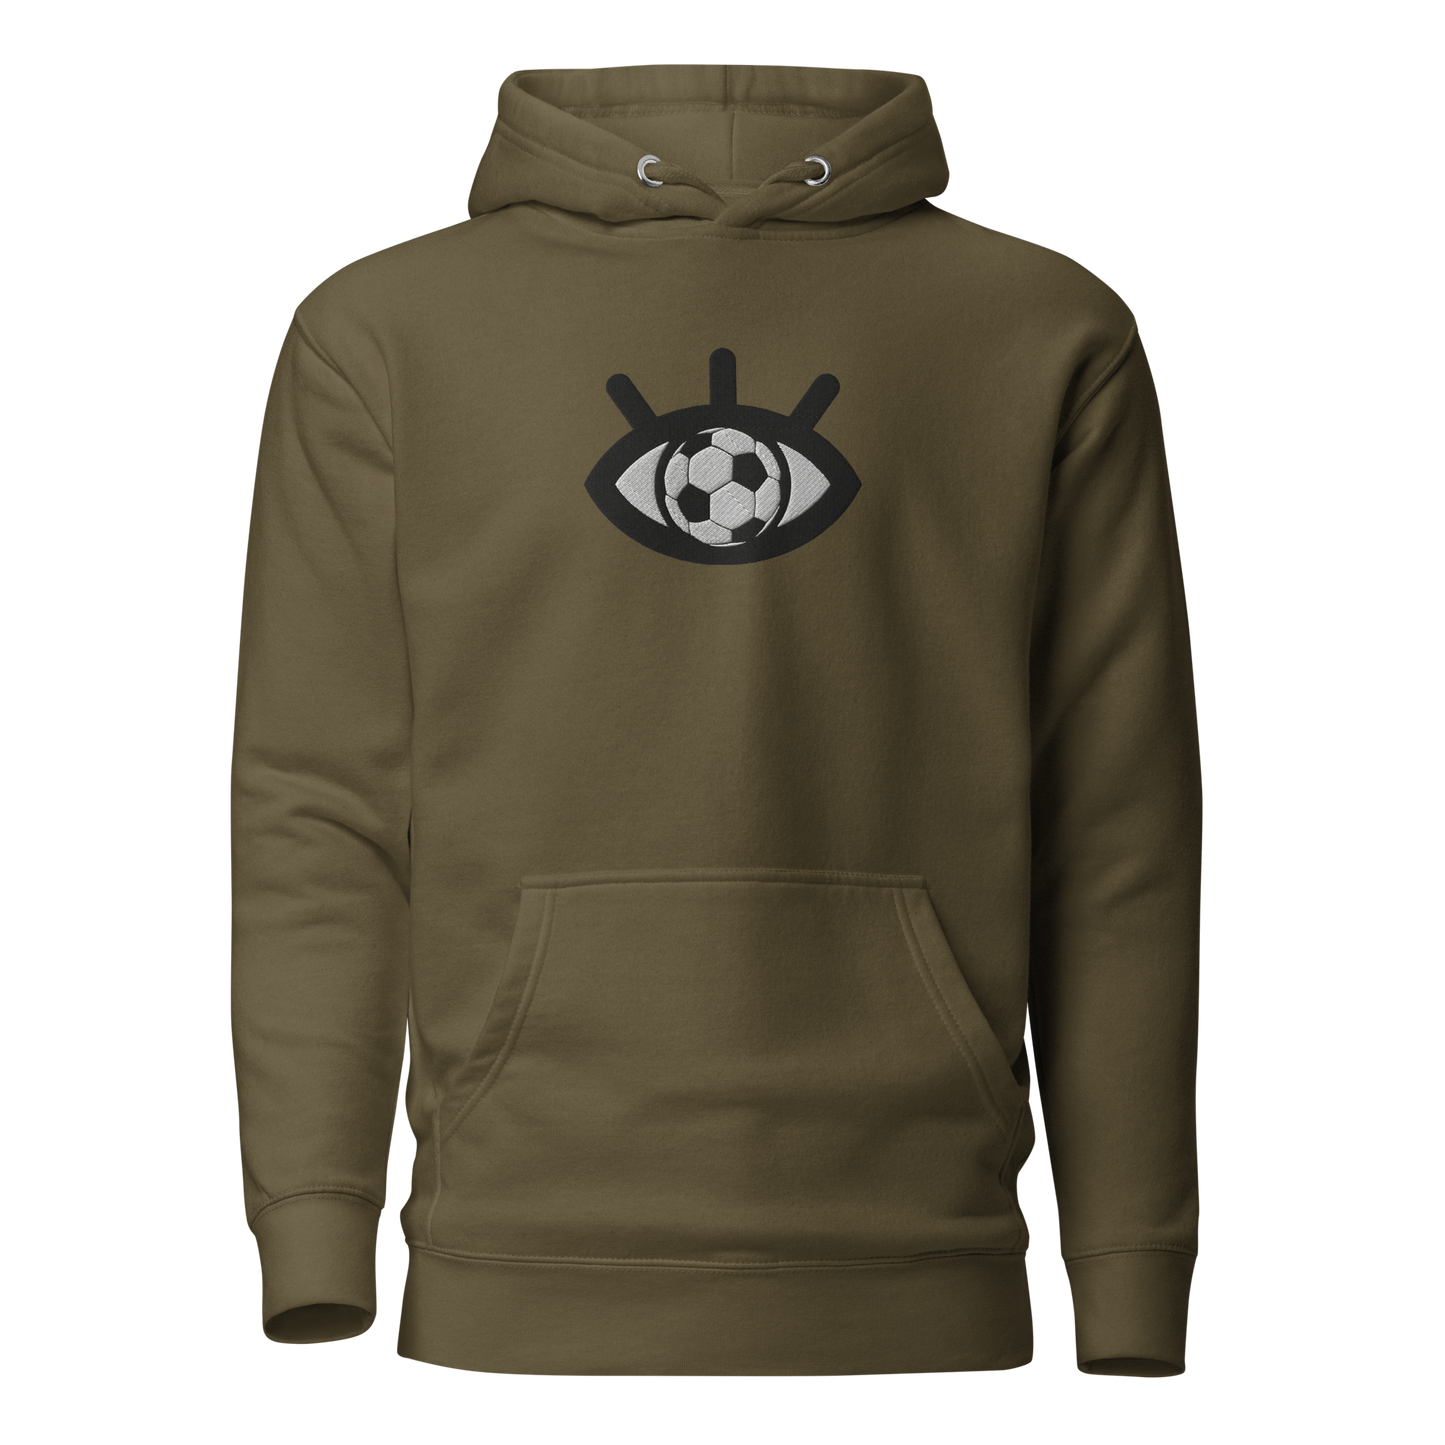 iSOCCER HOODIE